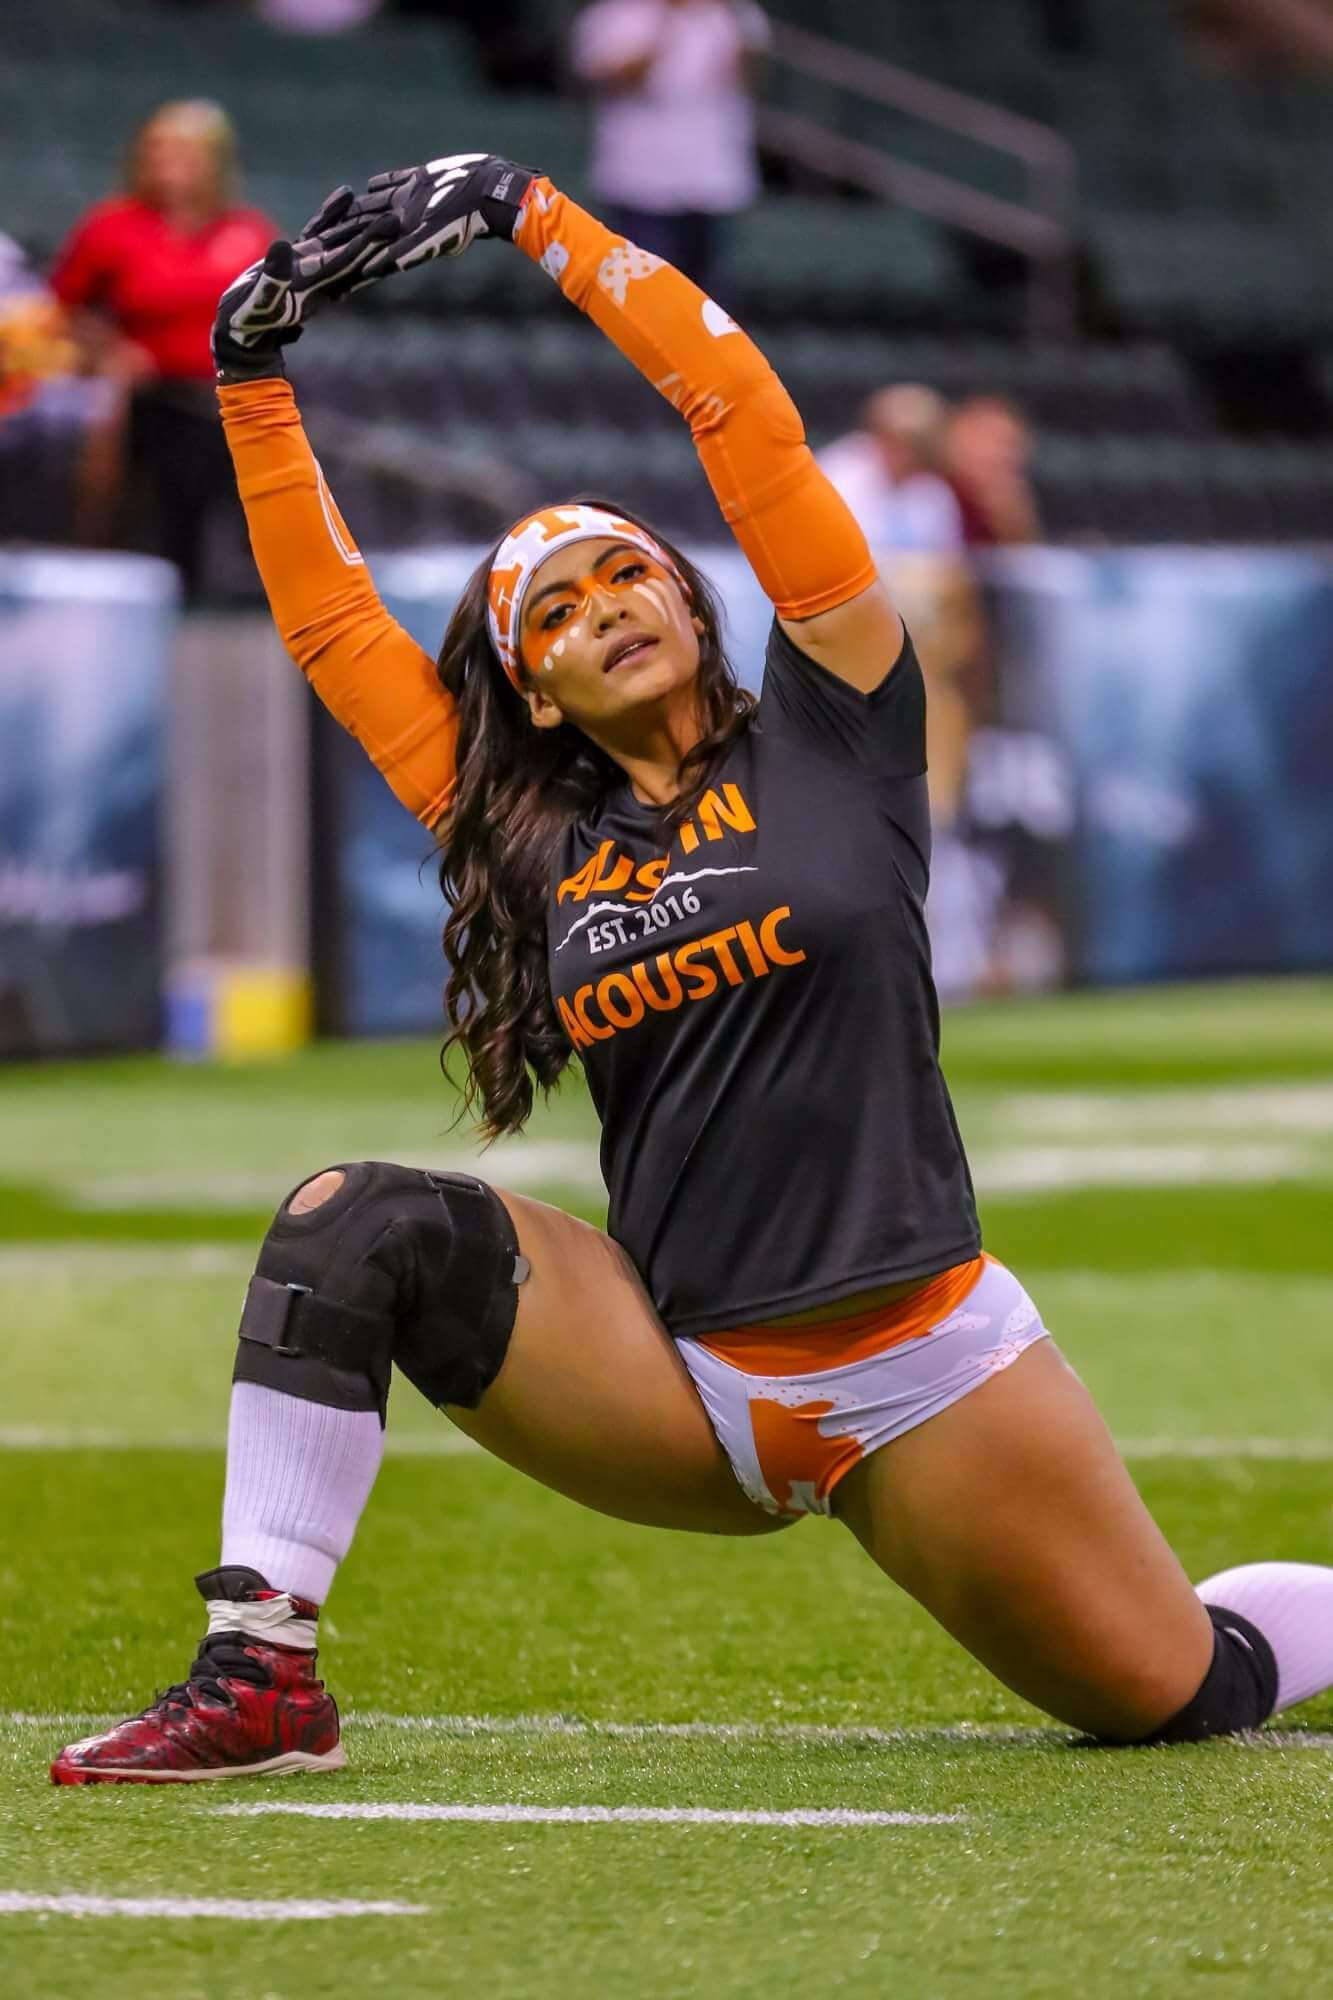 The Legends Football League Beautiful Women And Football, Need We Say Anymore! 41